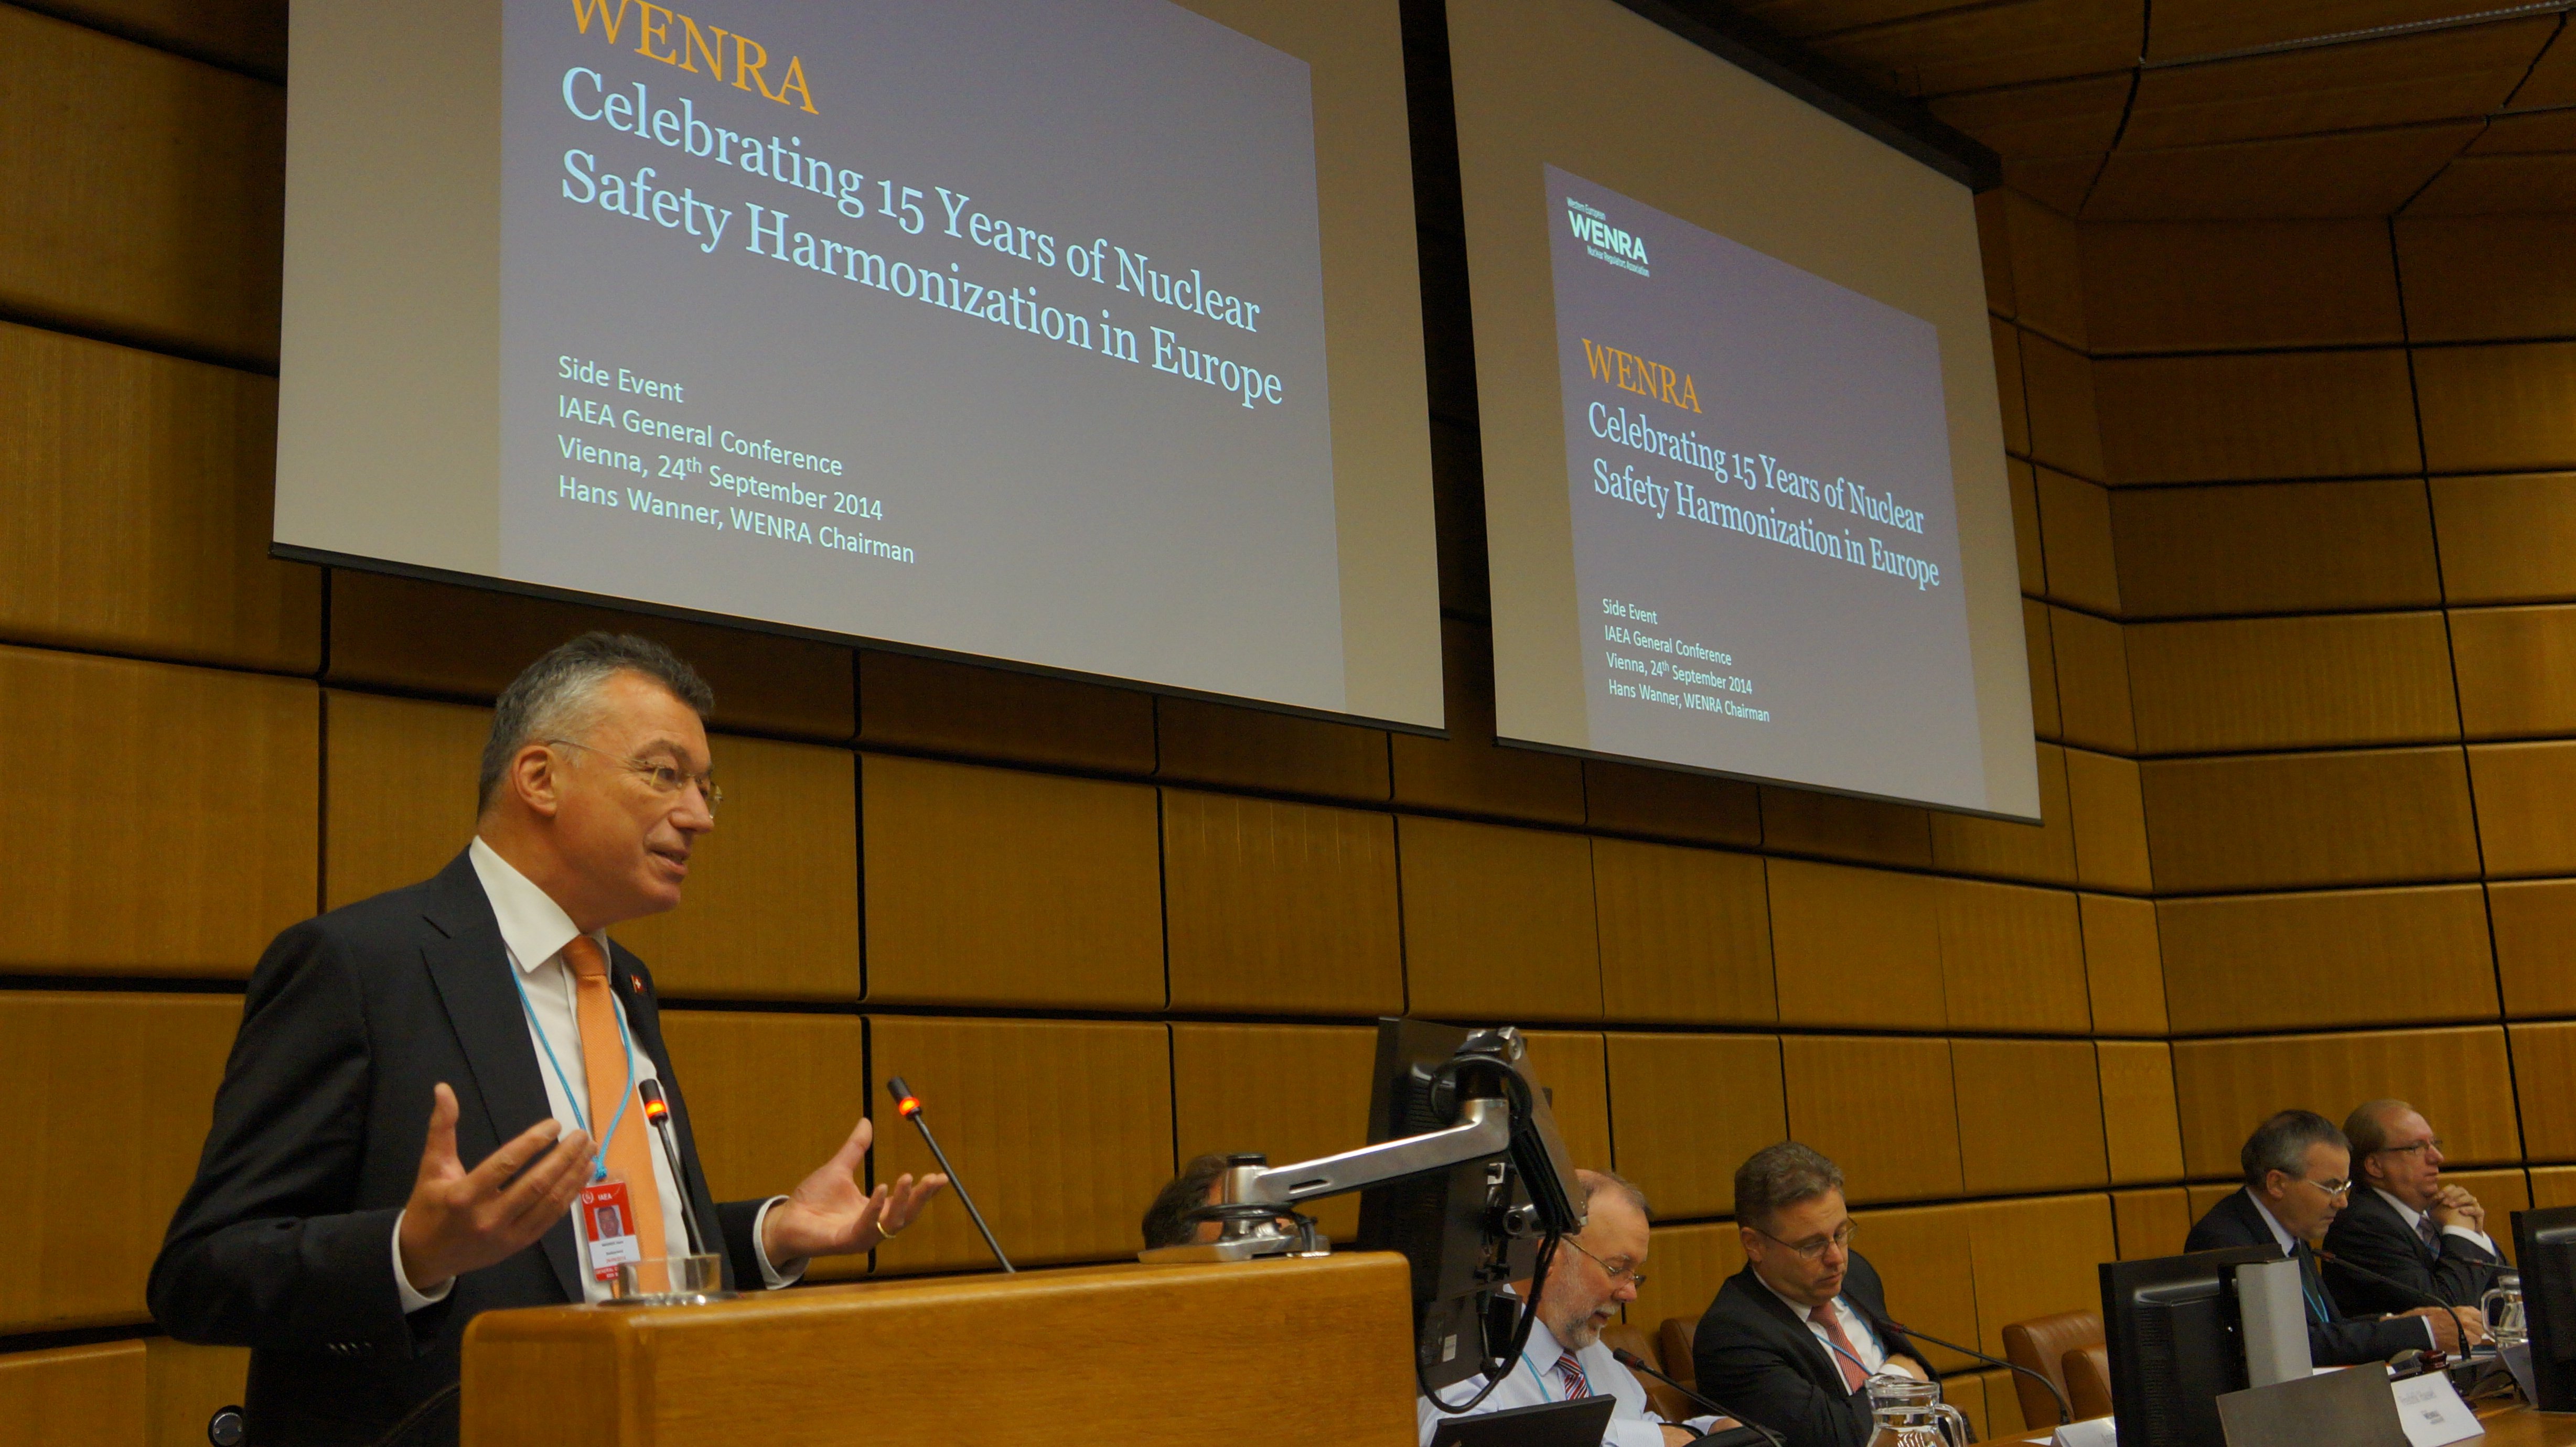 WENRA Side Event IAEA General Conference 2014